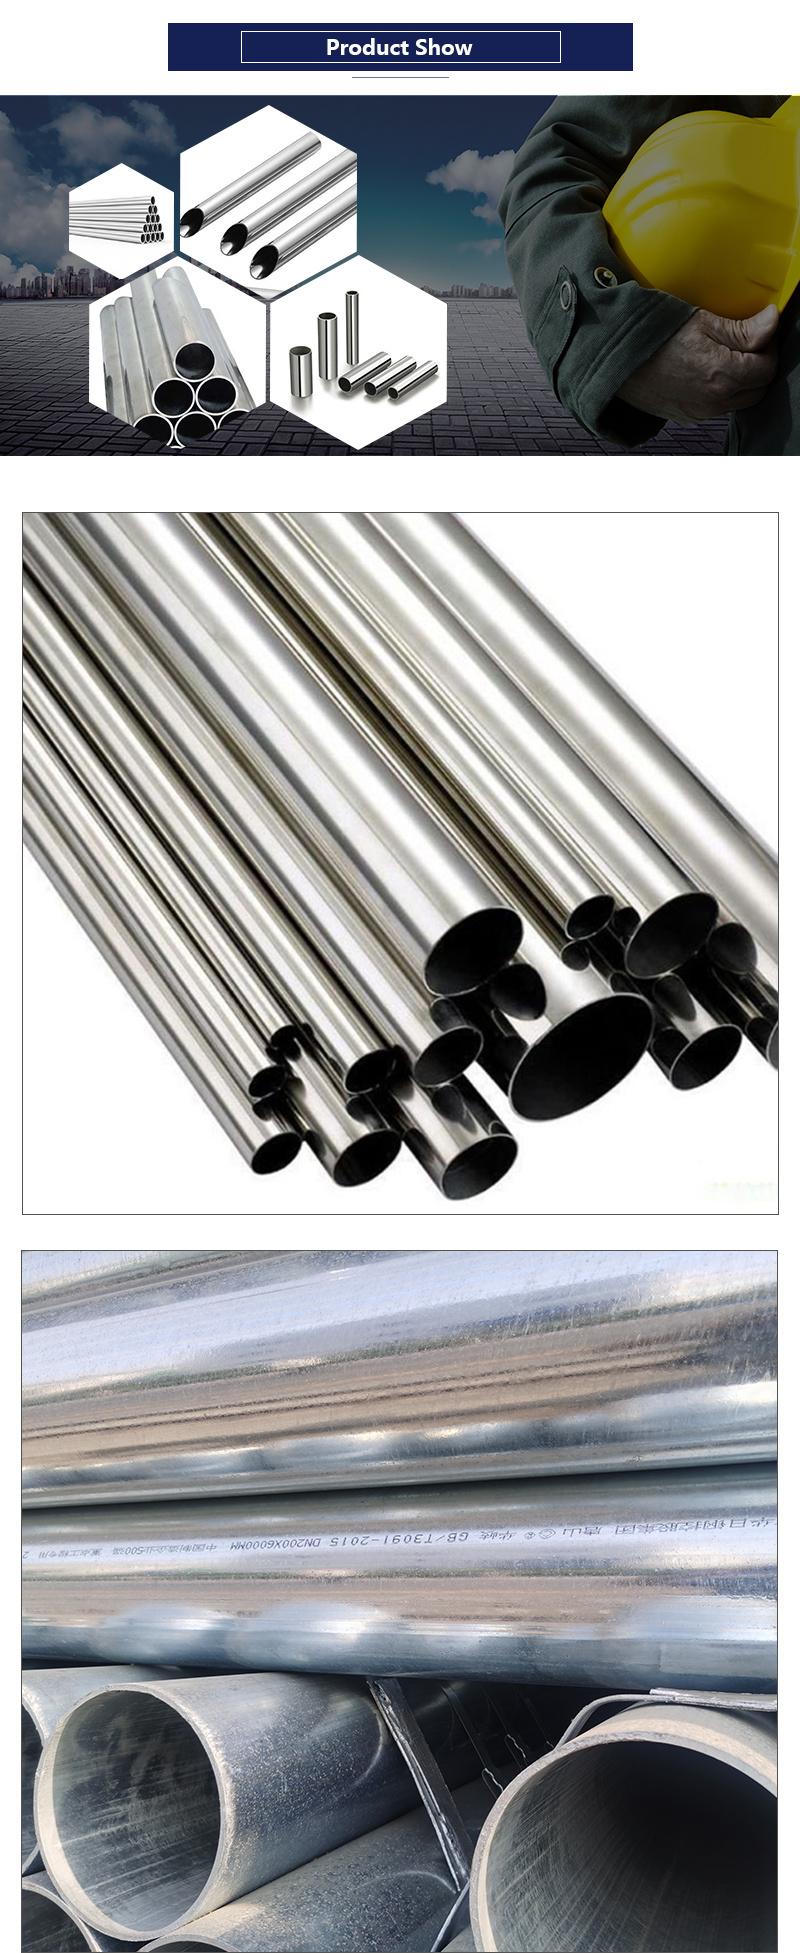 Hot Sale Round Shape Stainless Steel Tube Seamless Pipe ASTM Polished Decorative Tube 201 304 304L 316 316L Ss Pipes Steel Tube